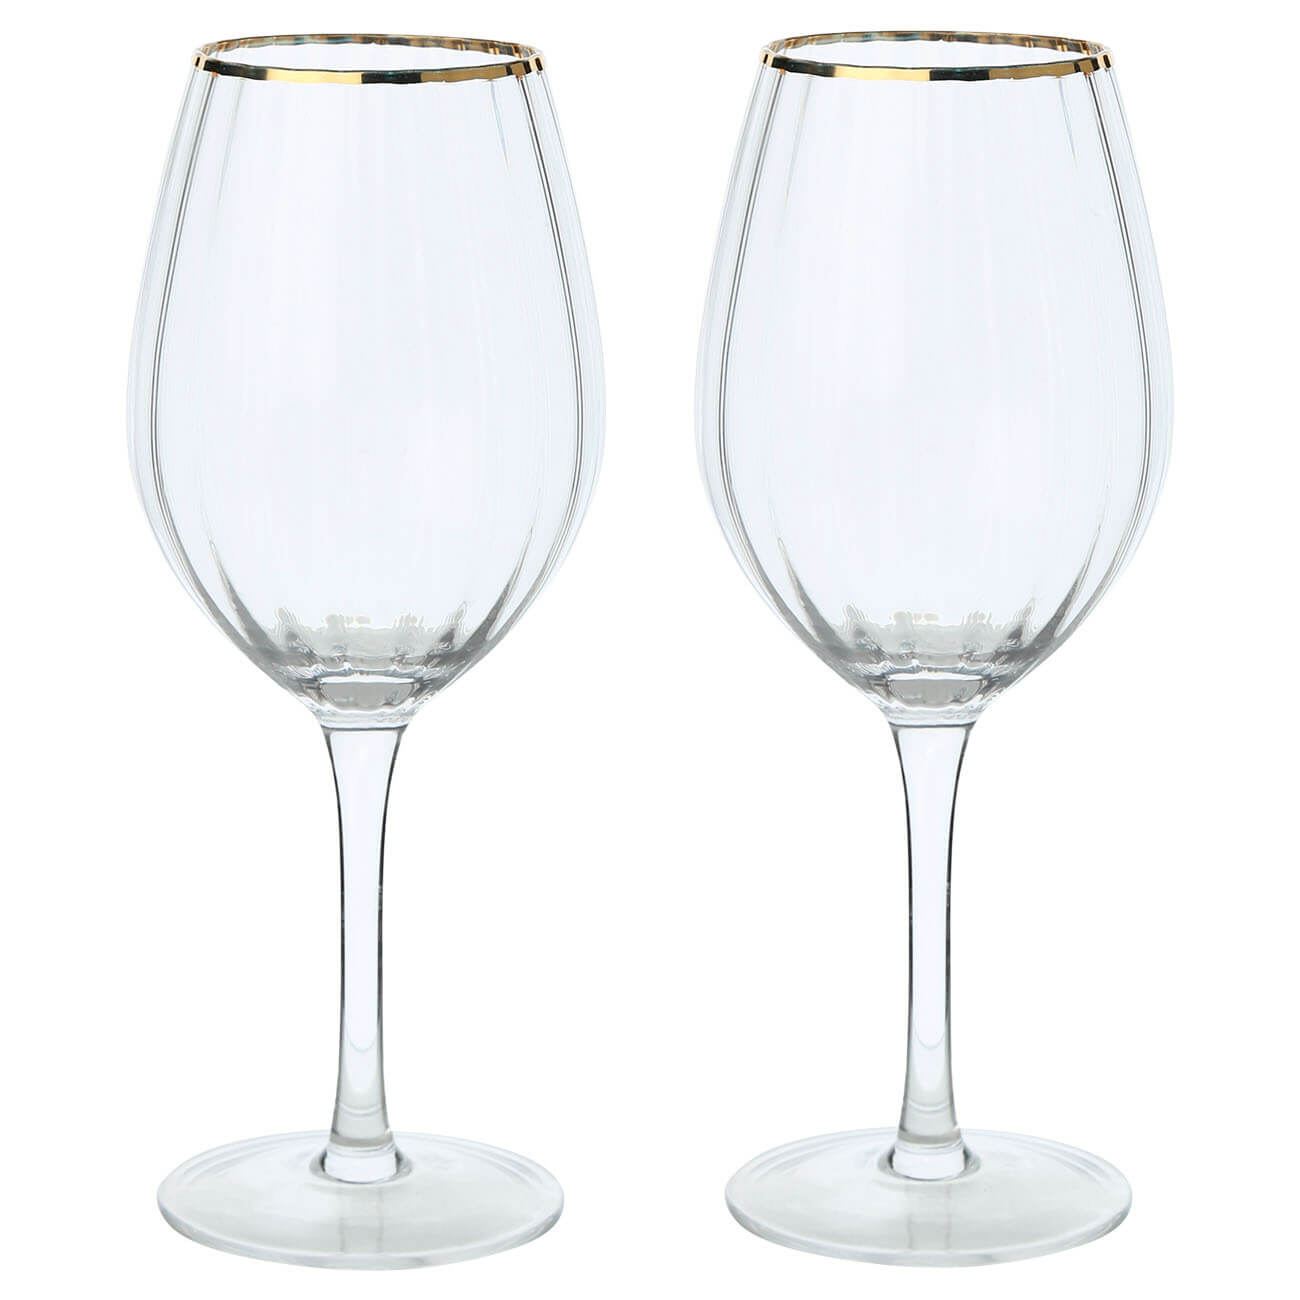 Wine glass, 530 ml, 2 pcs, glass, with golden edging, Lombardy Gold изображение № 1